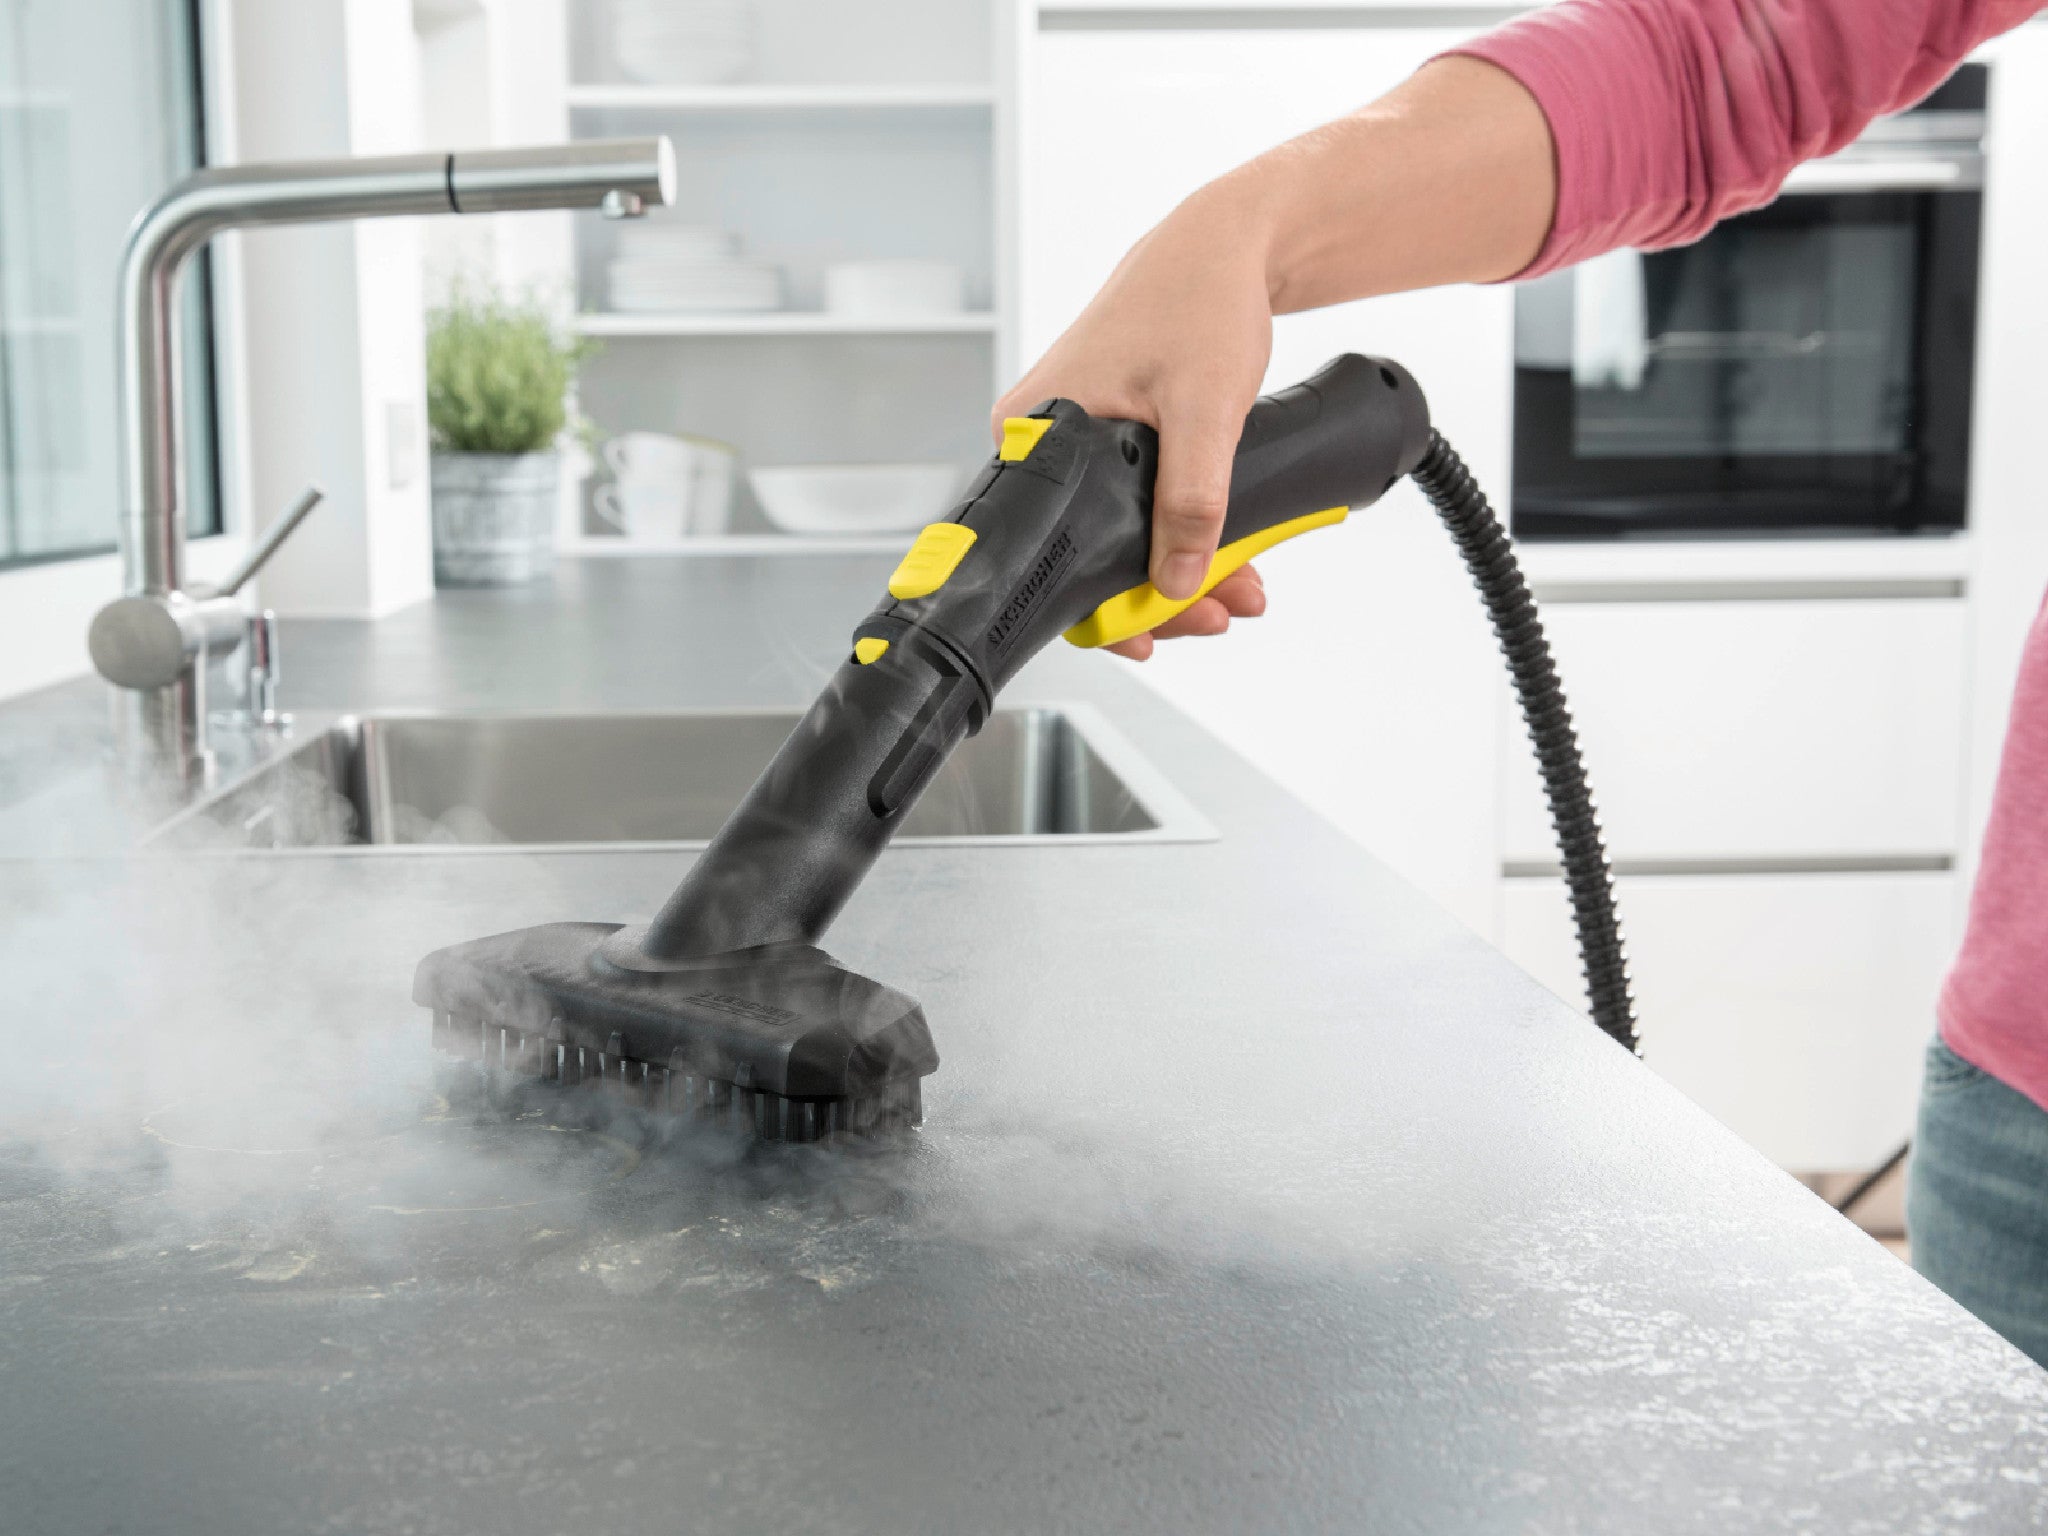 Kärcher SC 3 easy Fix steam cleaner review: compact, quick and effective |  The Independent